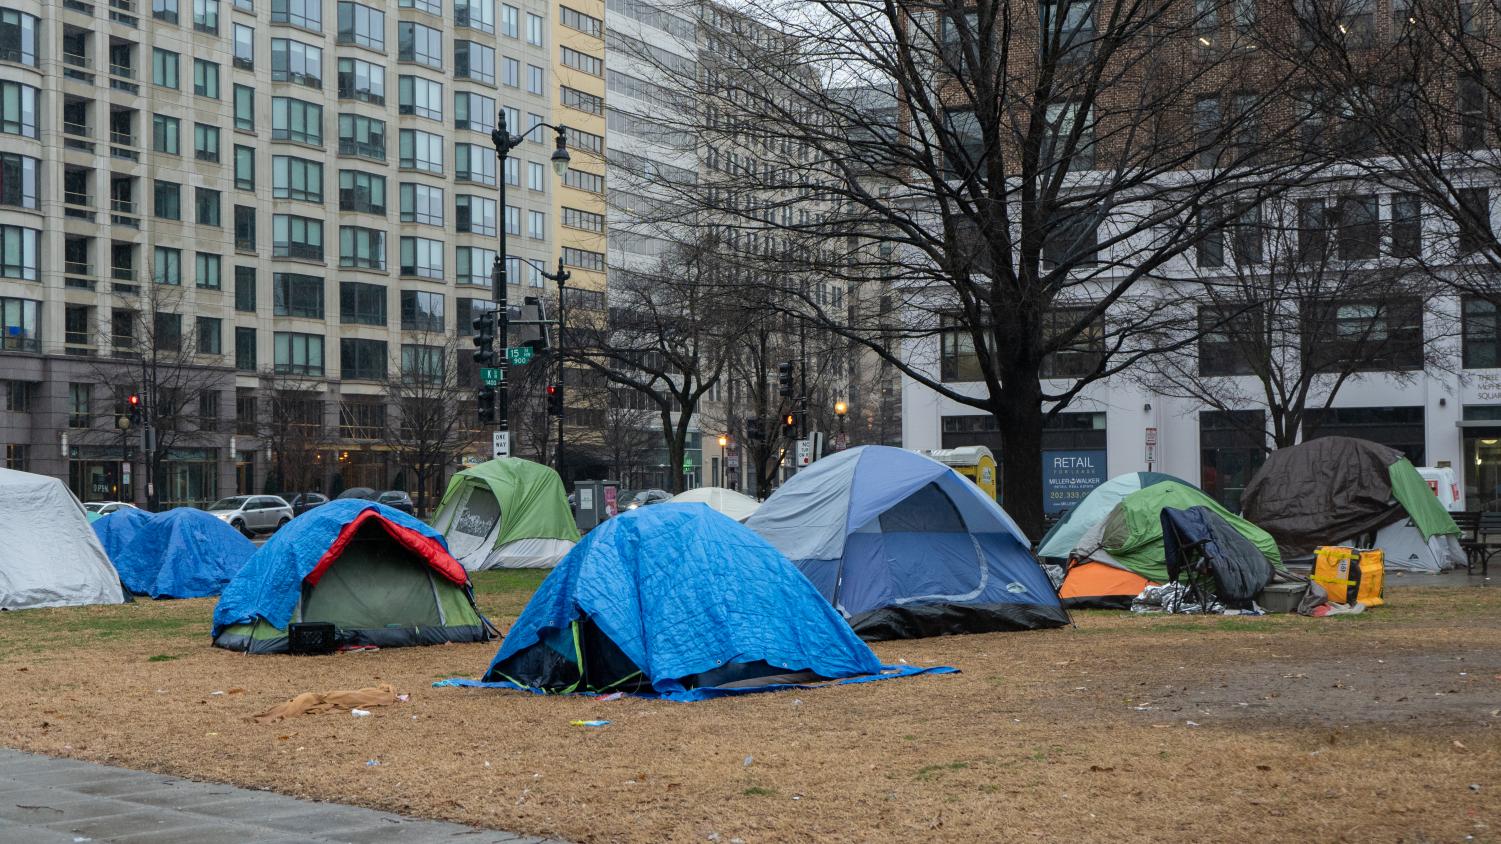 Encampment+clearings+displace+people+experiencing+homelessness